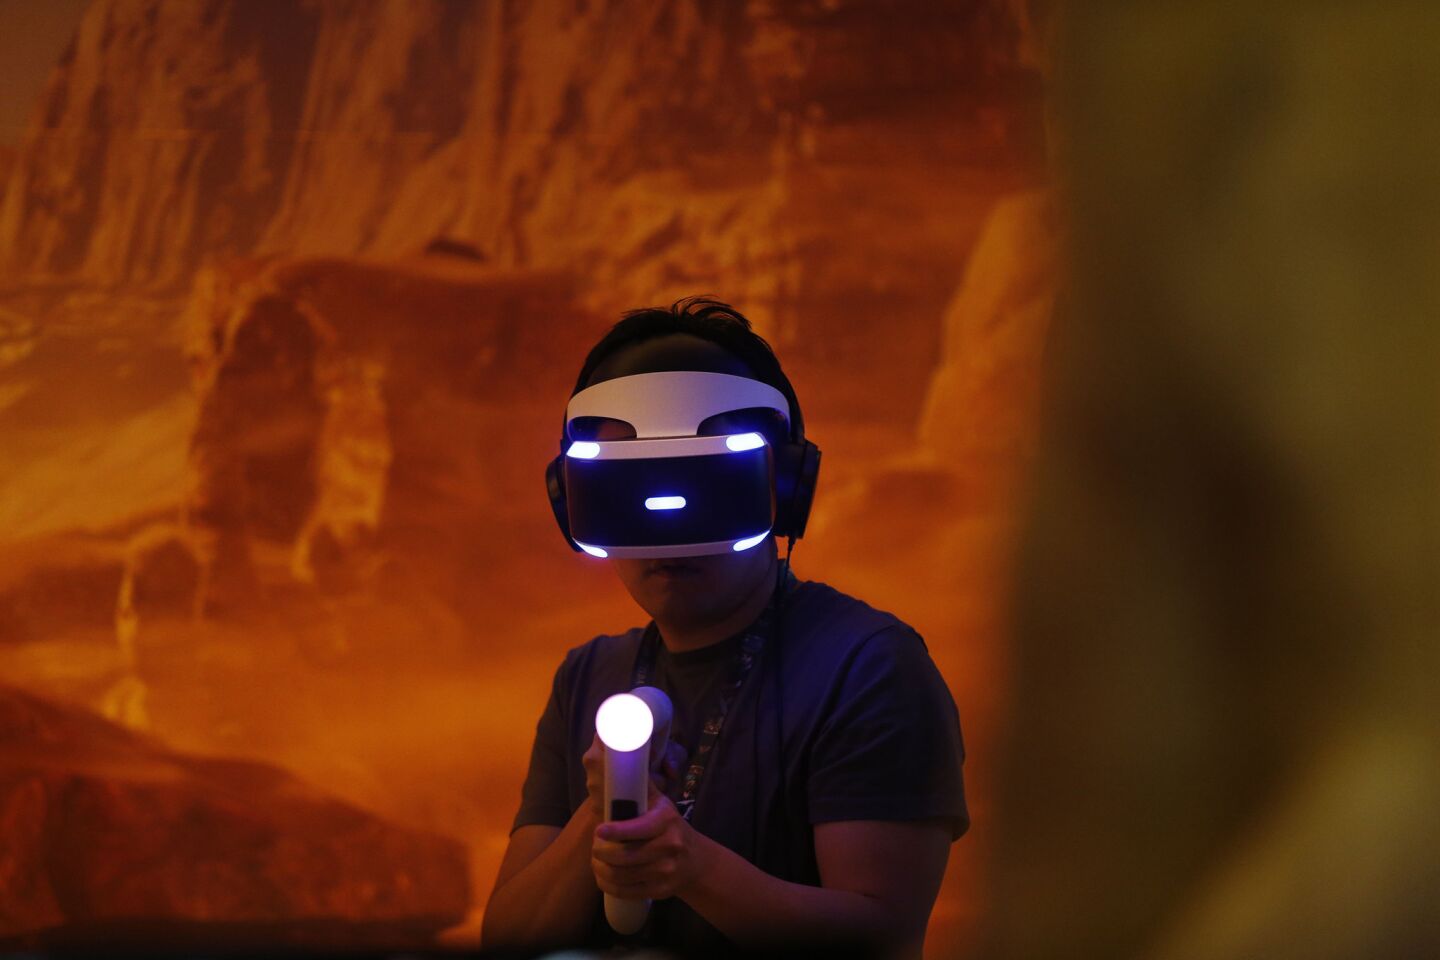 A game enthusiast plays Sony PlayStation's new VR game "Farpoint" during the Electronic Entertainment Expo (E3) June 14-16 at the Los Angeles Convention Center on June 14, 2016.